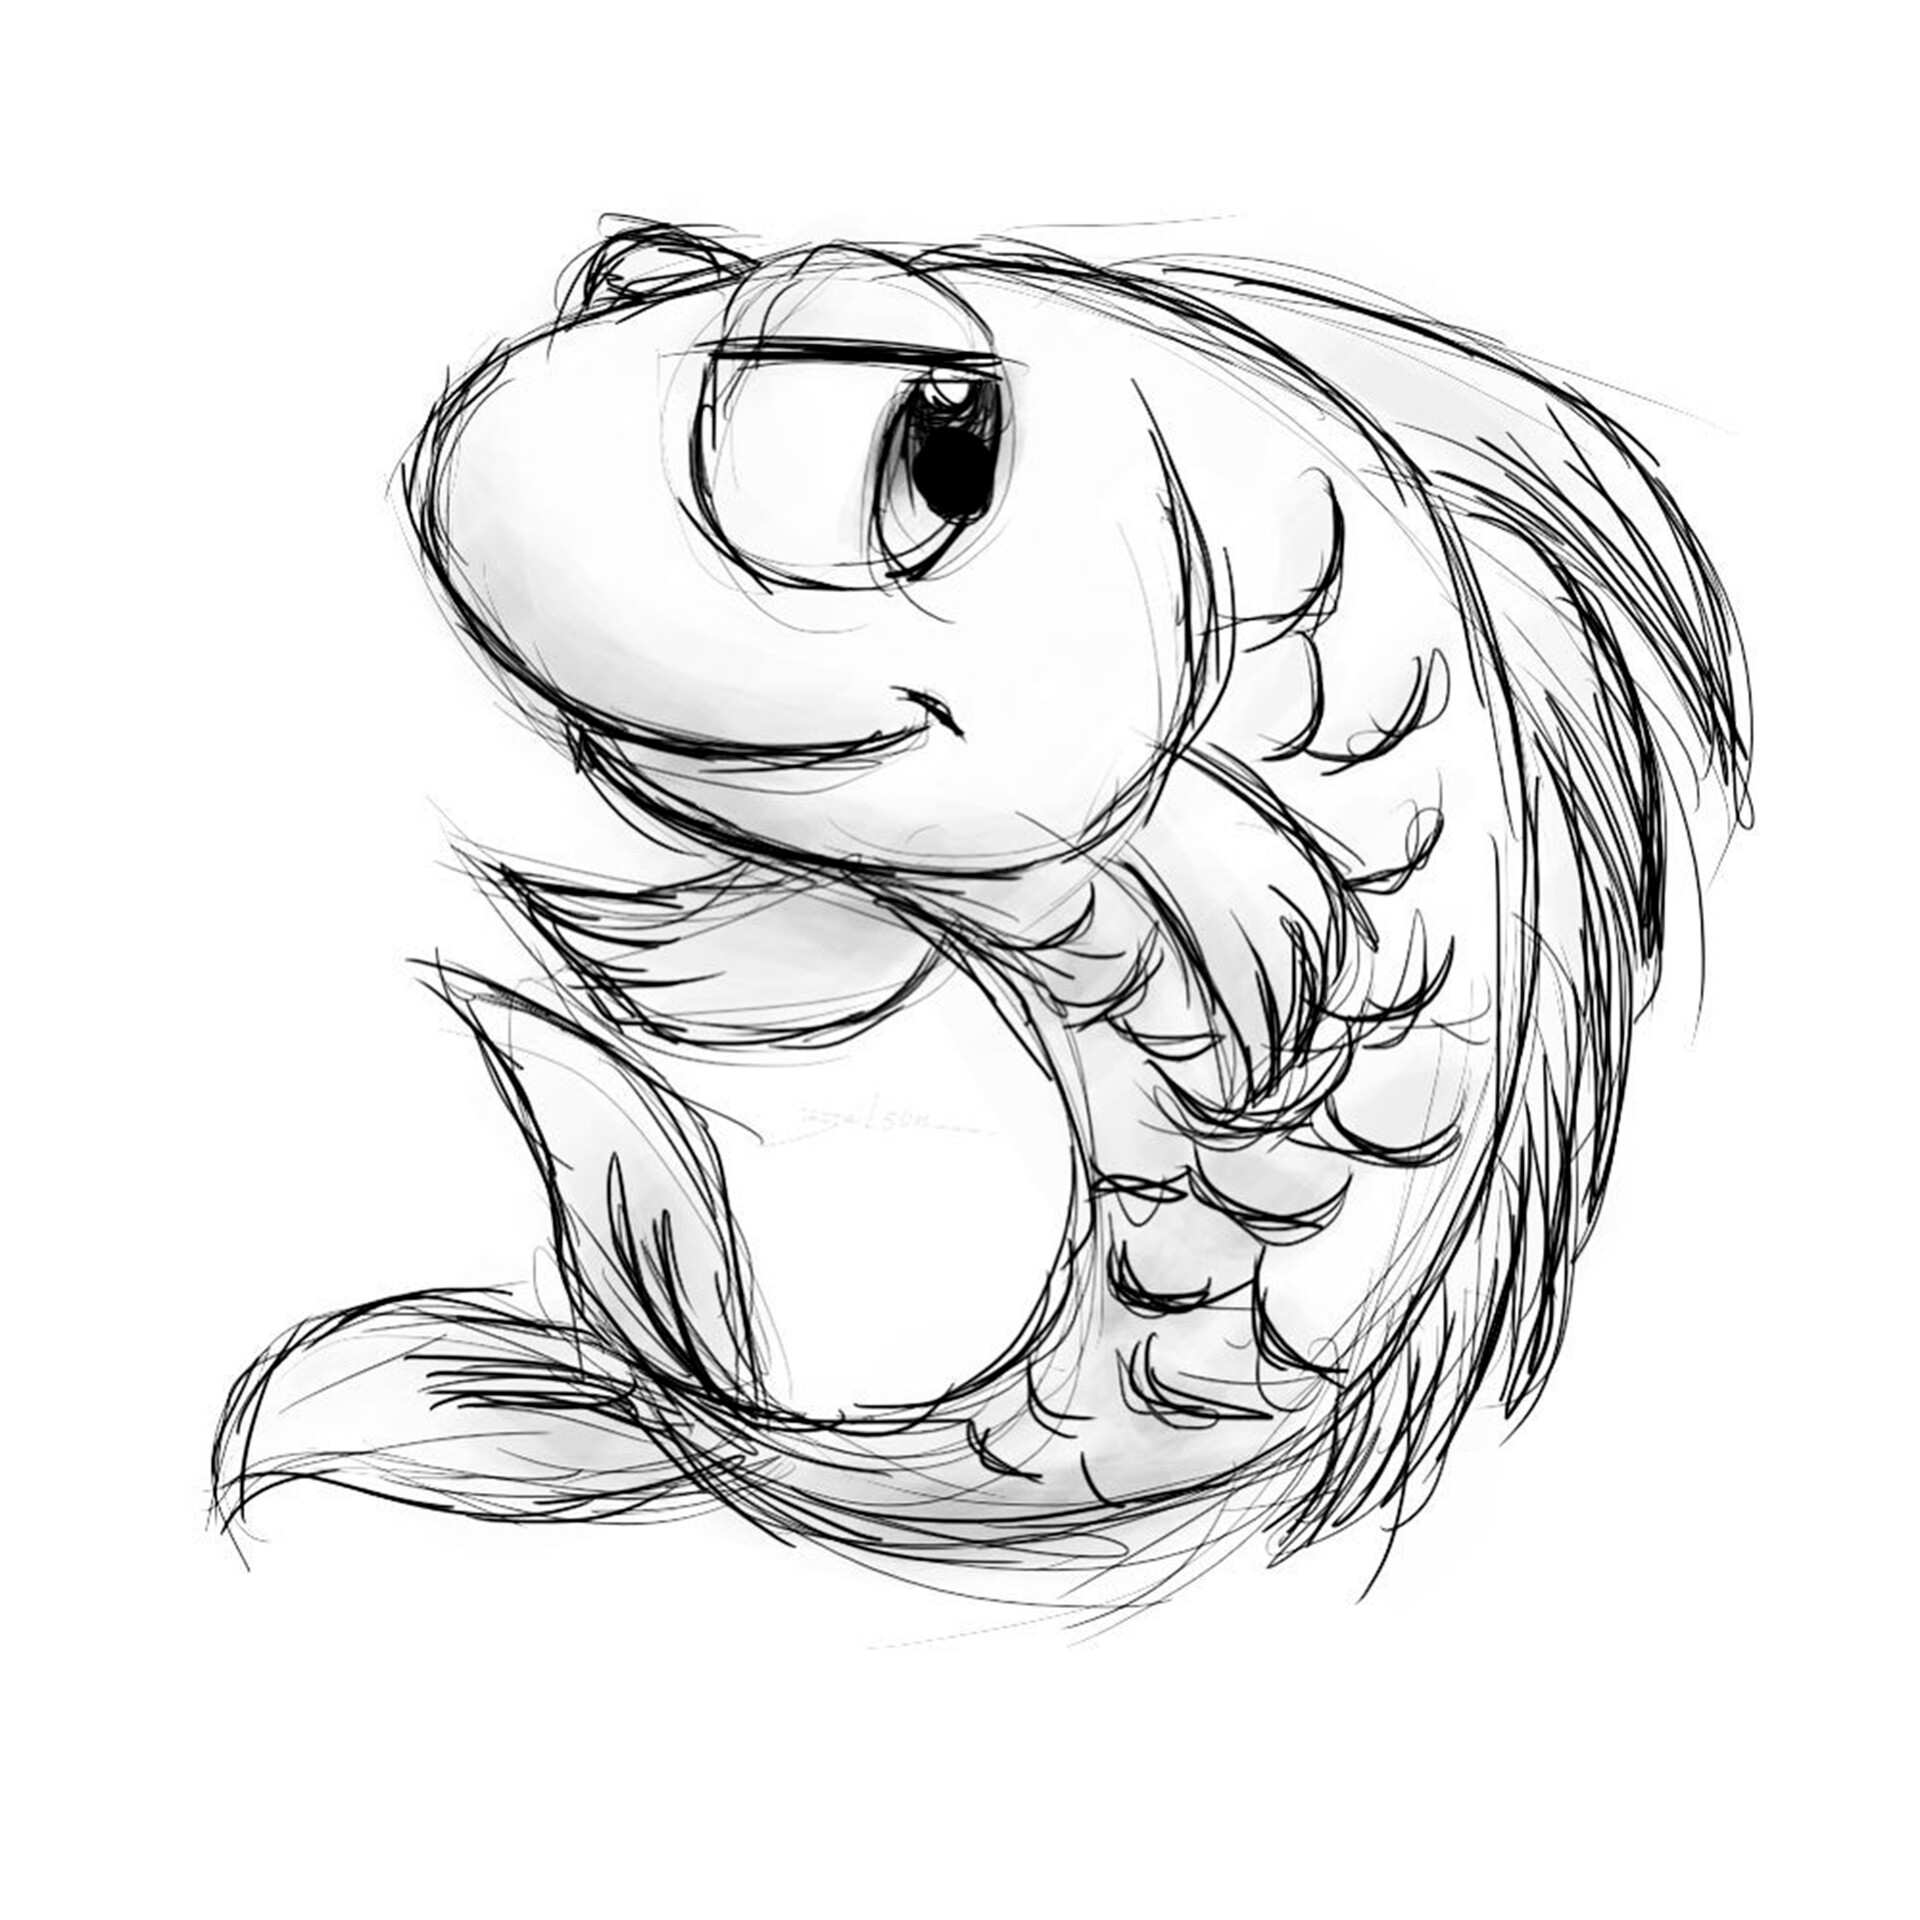 Black Line Drawing Small Fish Fish Drawing Fish Sketch Black PNG  Transparent Clipart Image and PSD File for Free Download